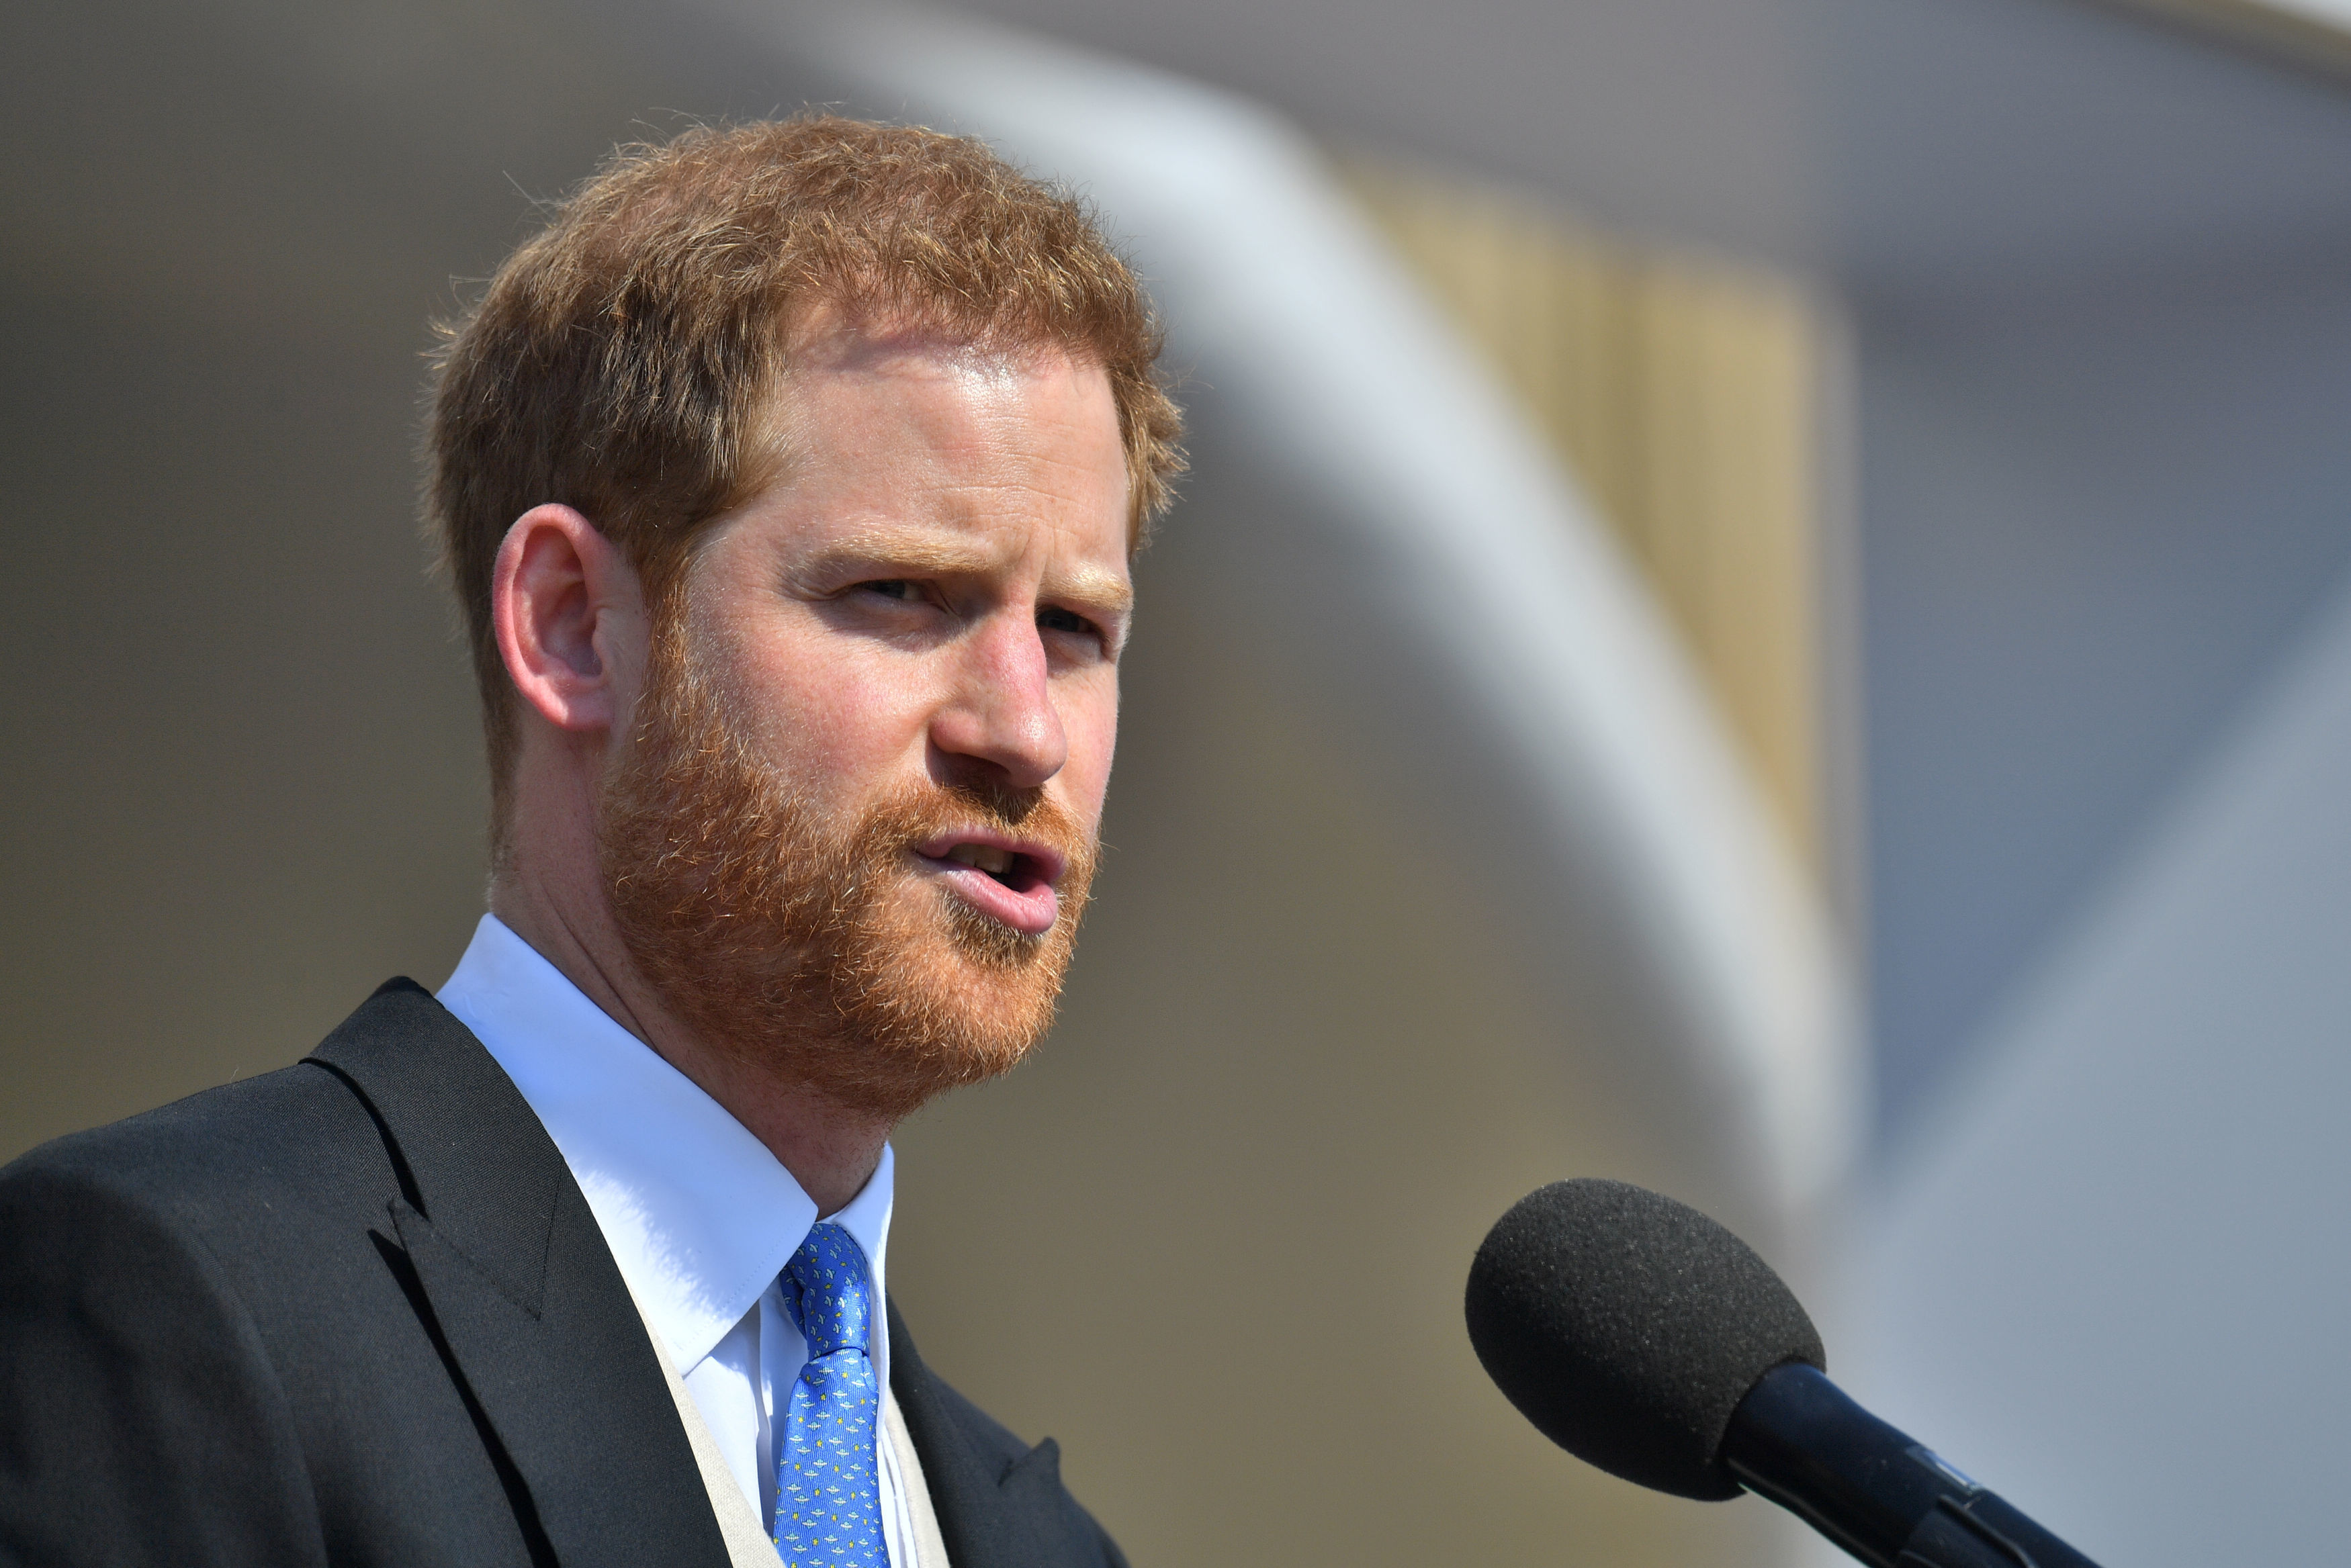 The Duke of Sussex delivers his speech (Dominic Lipinski/PA)